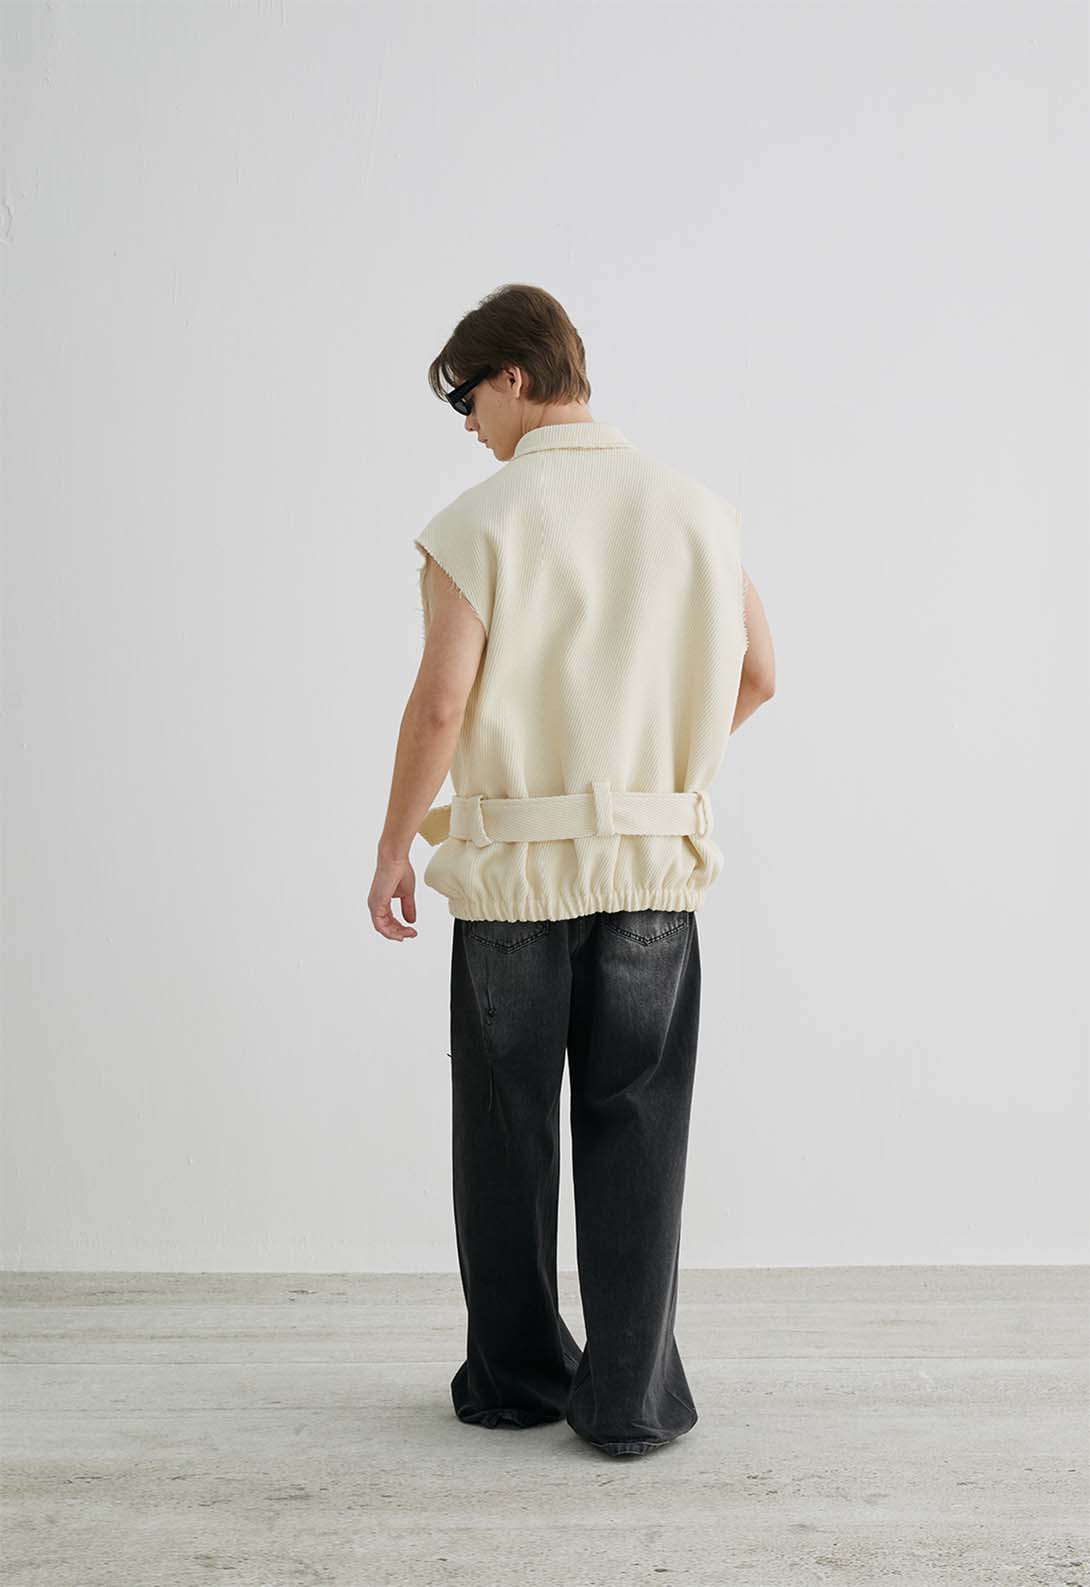 Cut-out twill weave oversized vest